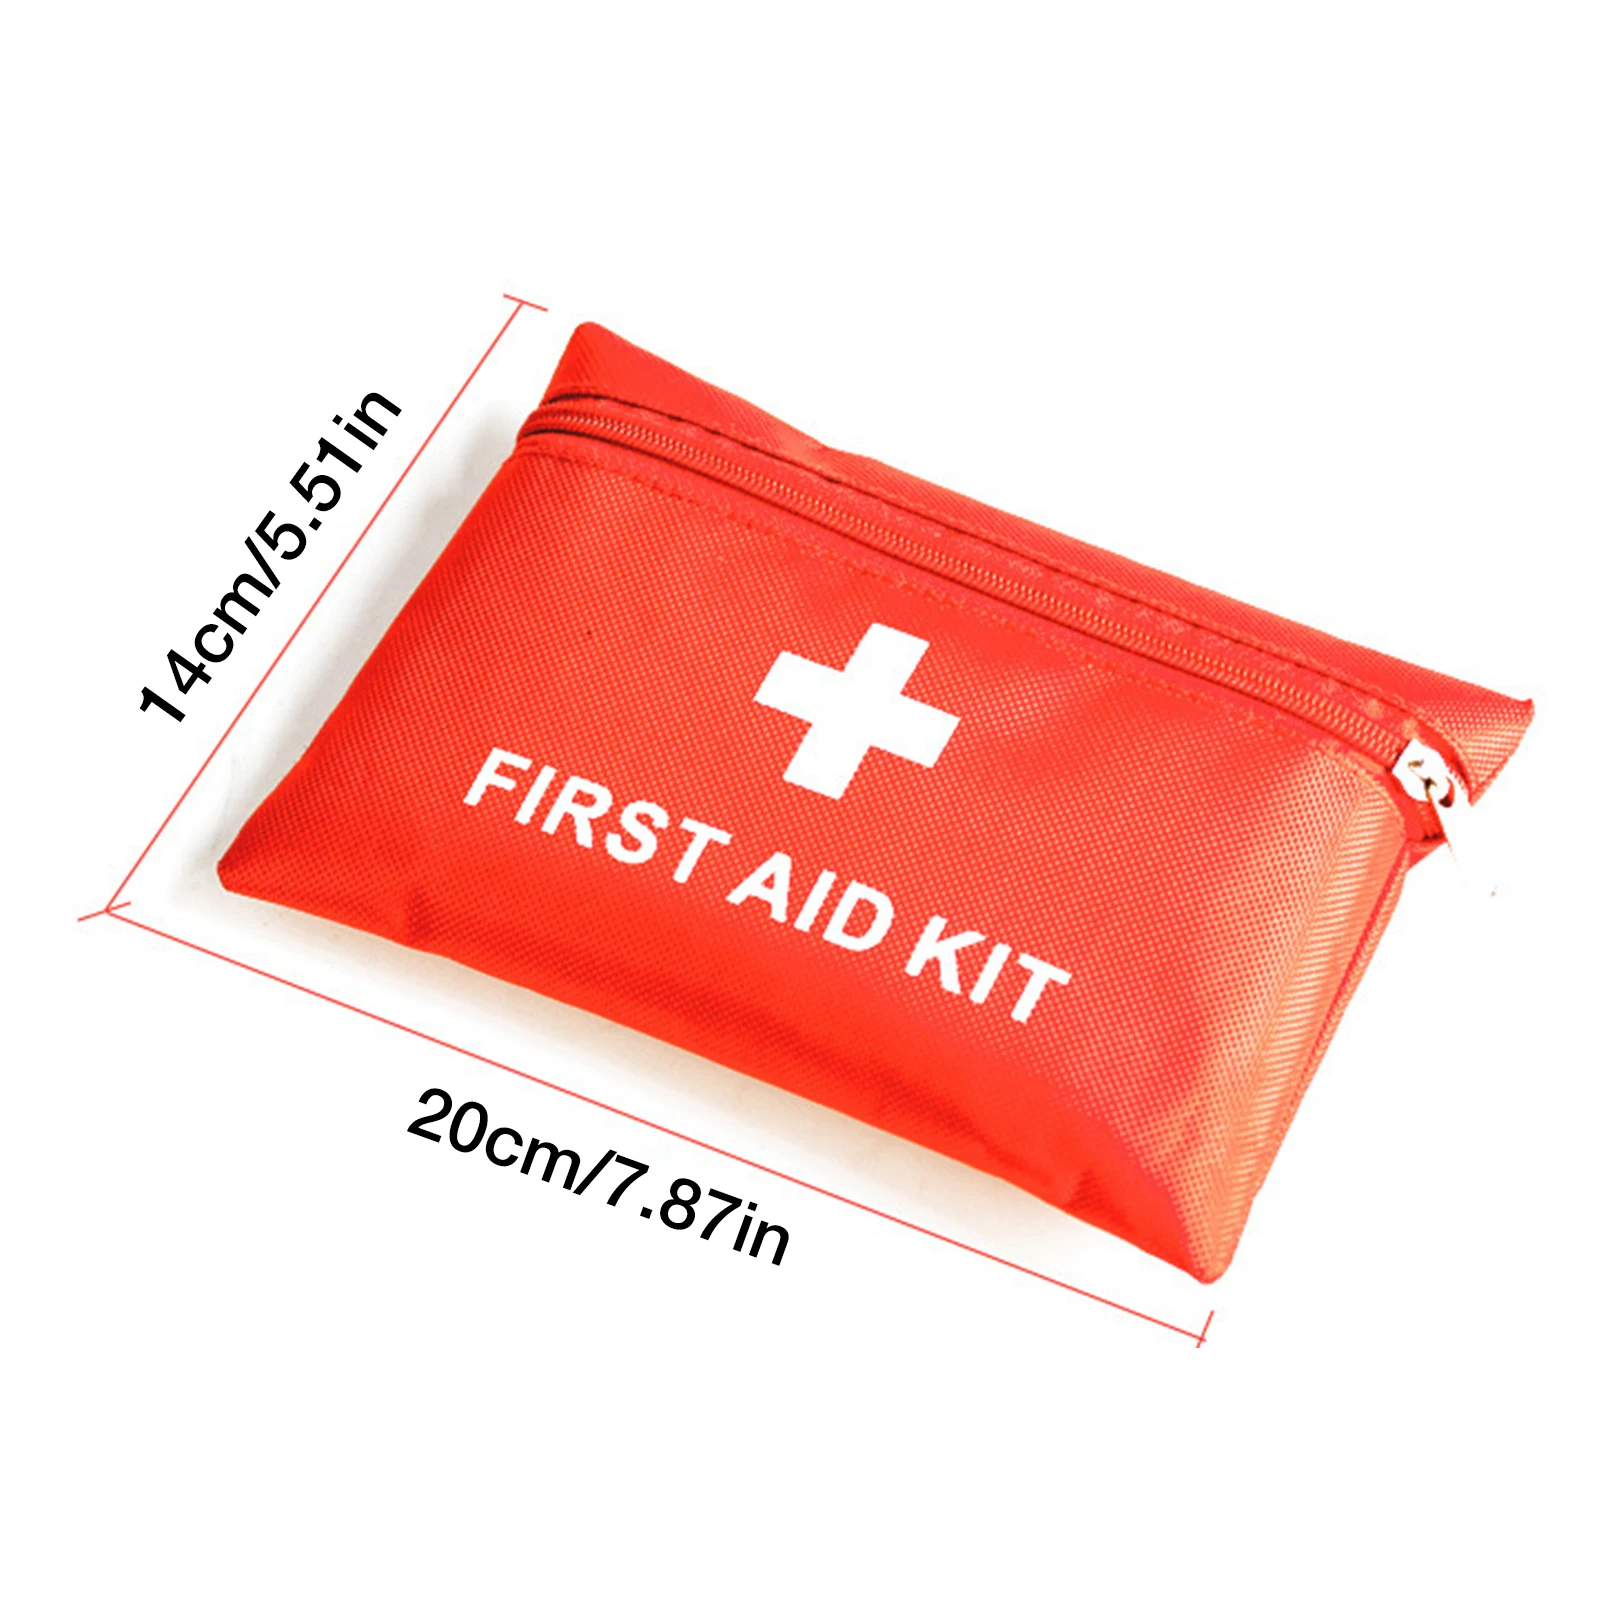 Portable Outdoor Waterproof Person Or Family First Aid Kit for Emergency Survival Medical  In Travel Camping or Hiking